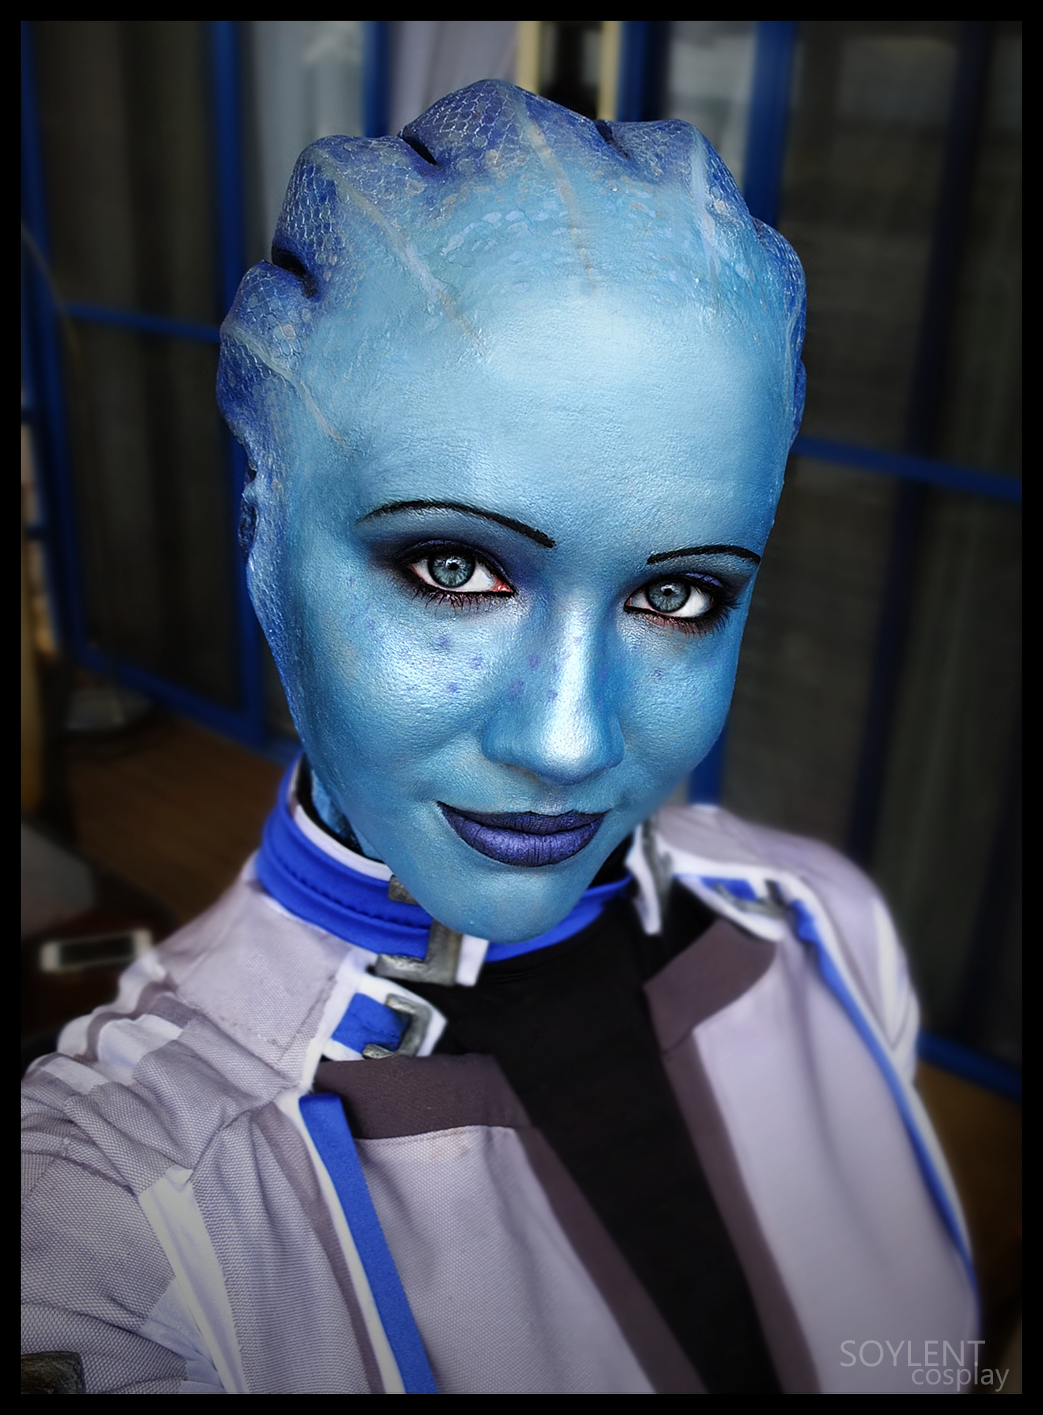 cosplayers doing it right - cosplay mass effect - Soylent cosplay